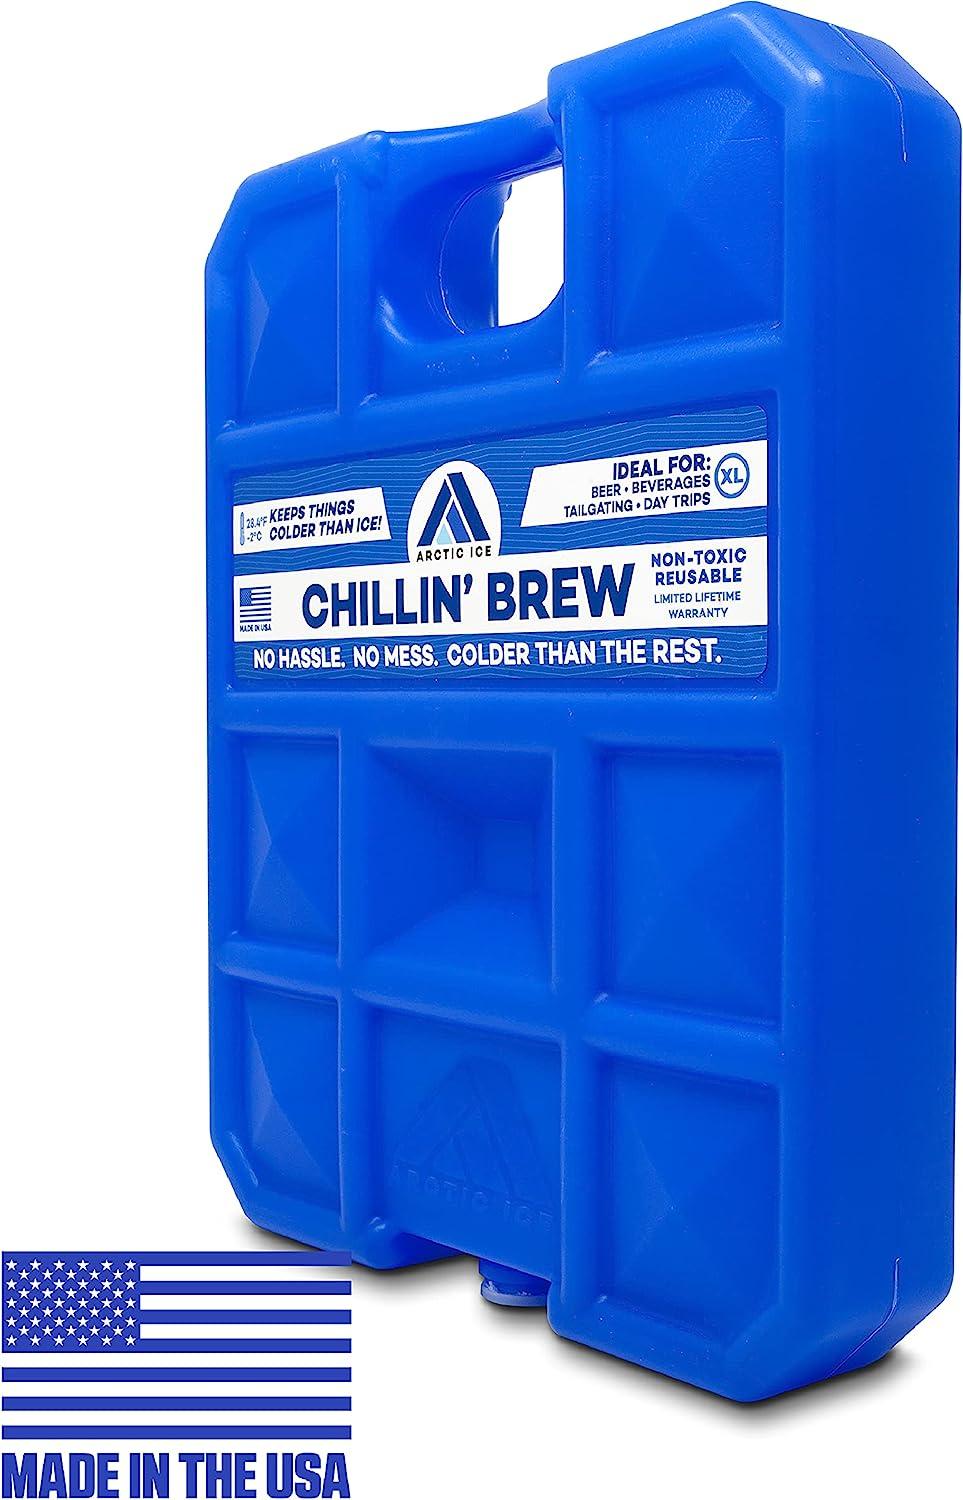 Arctic ICE Chillin' Brew Series, Long Lasting Reusable Ice Pack, Blue Large